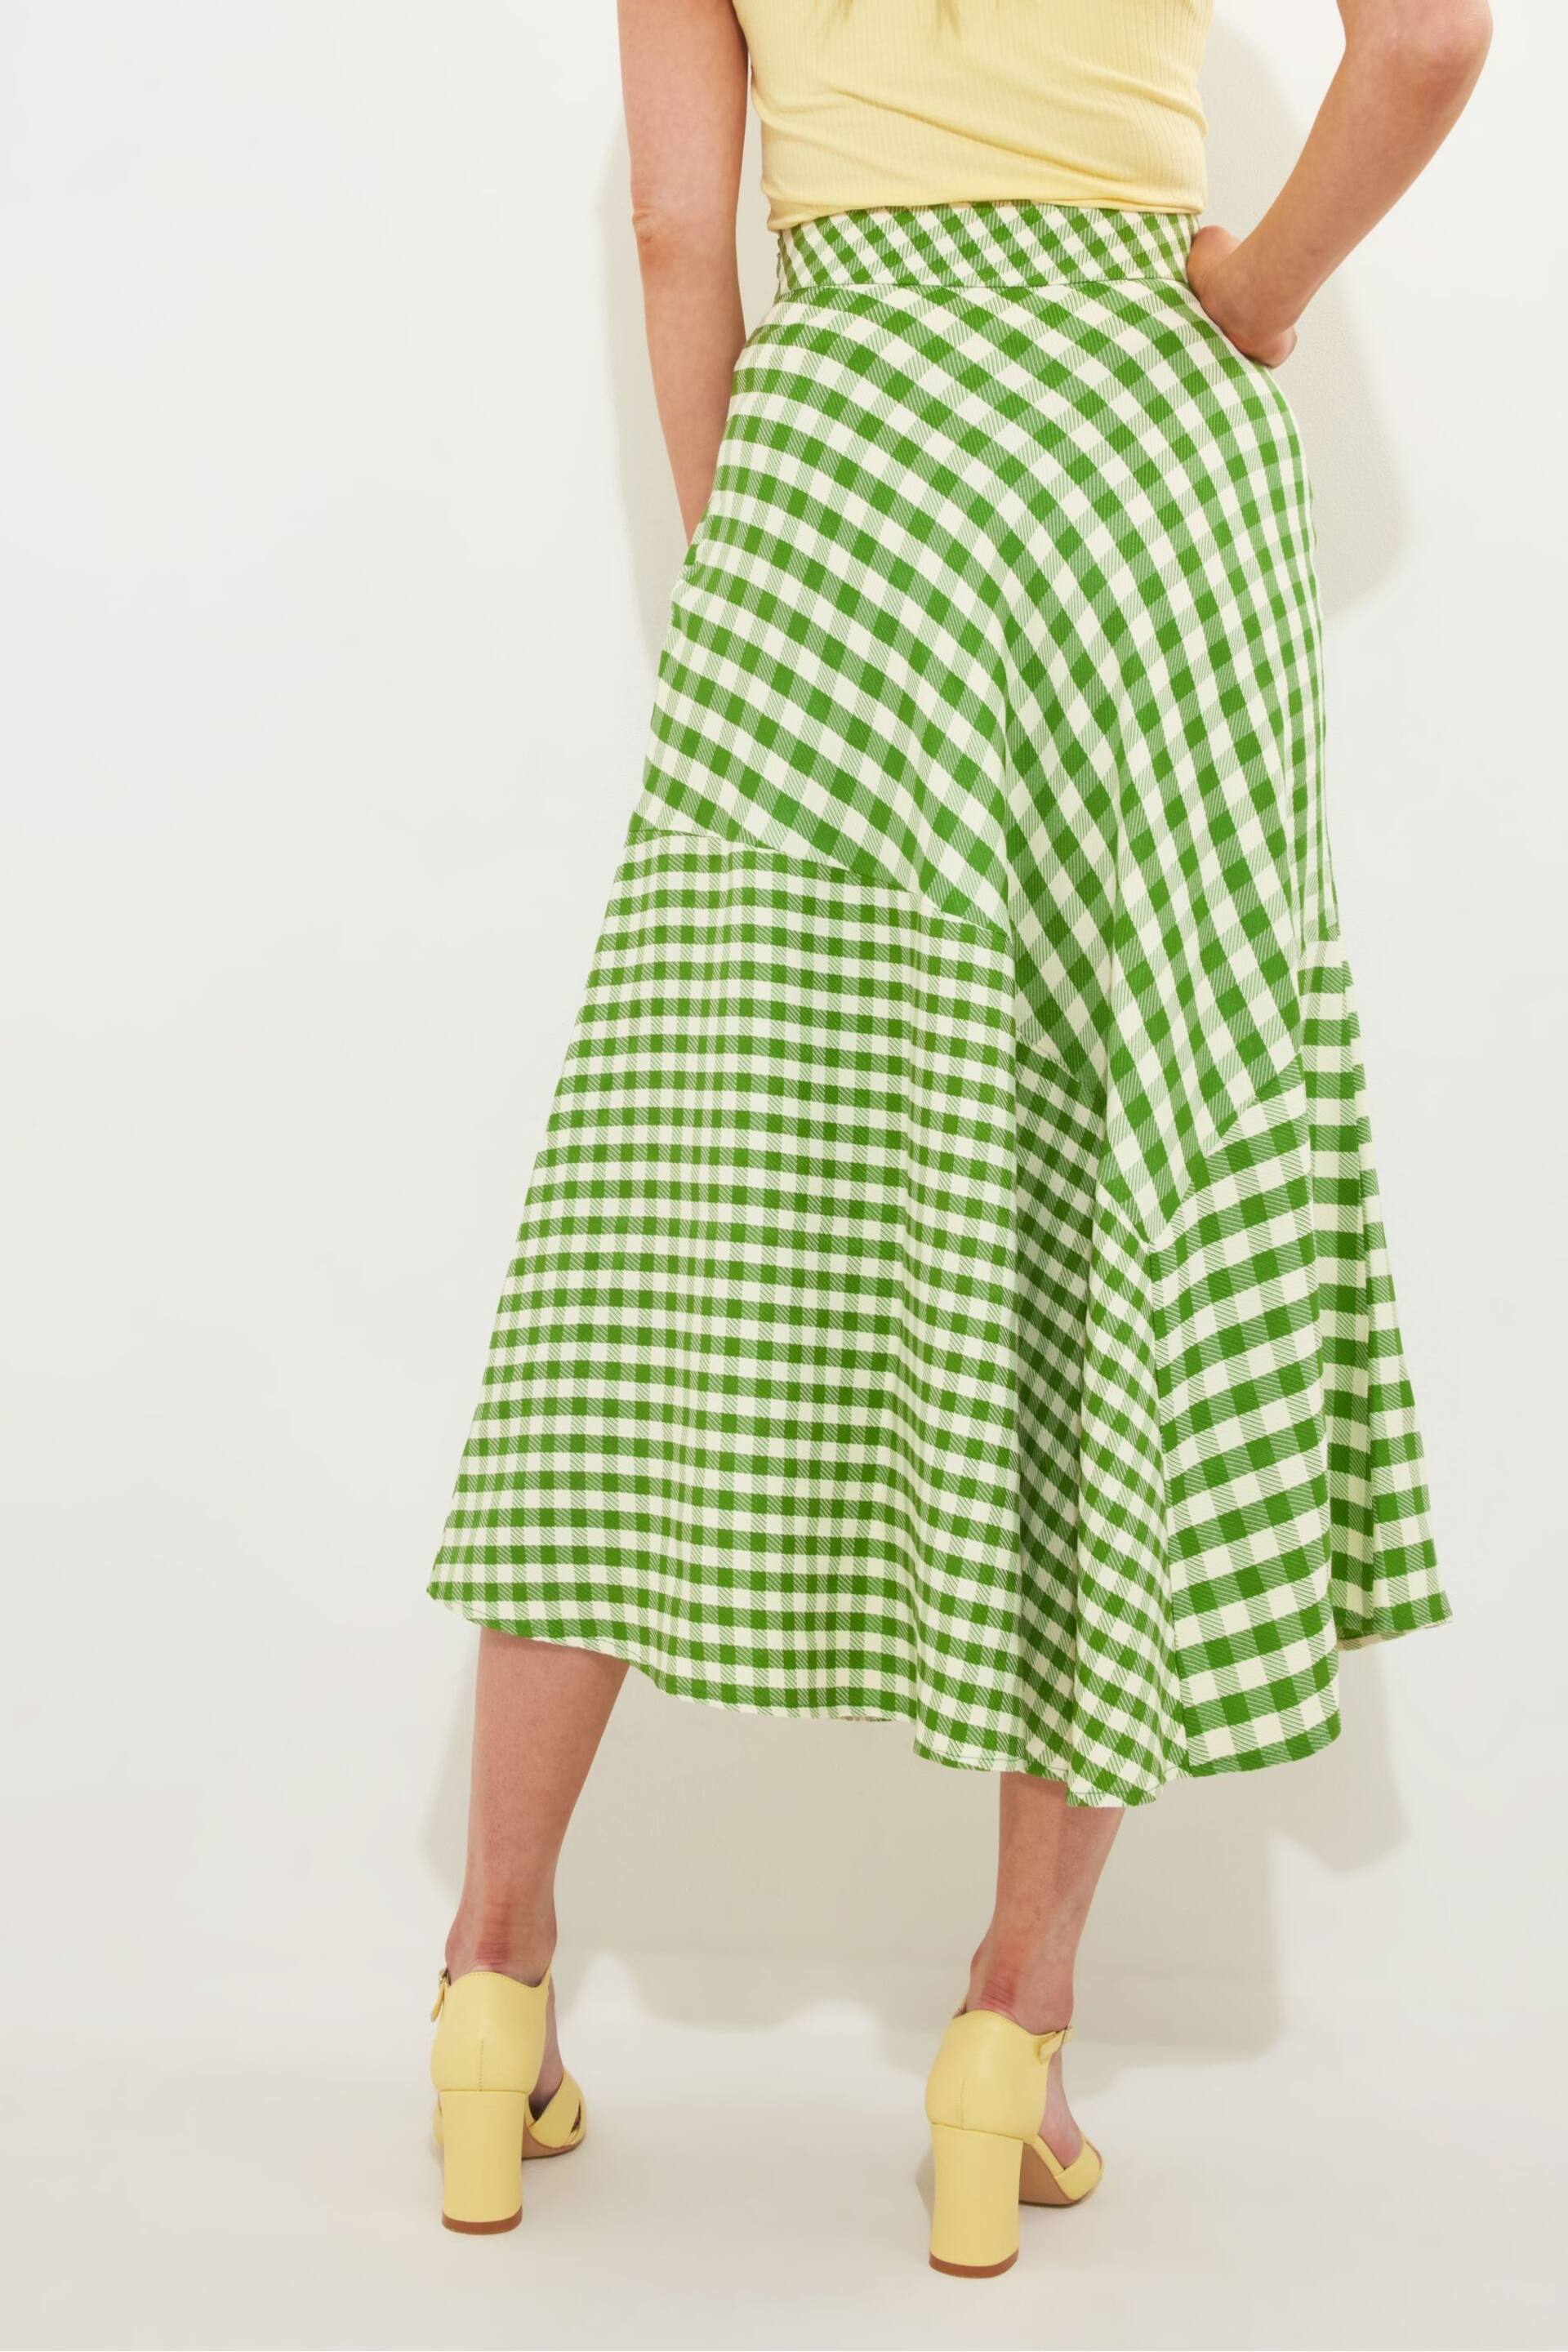 Joe Browns Green Retro Gingham Fit and Flare Full Maxi Skirt - Image 3 of 6